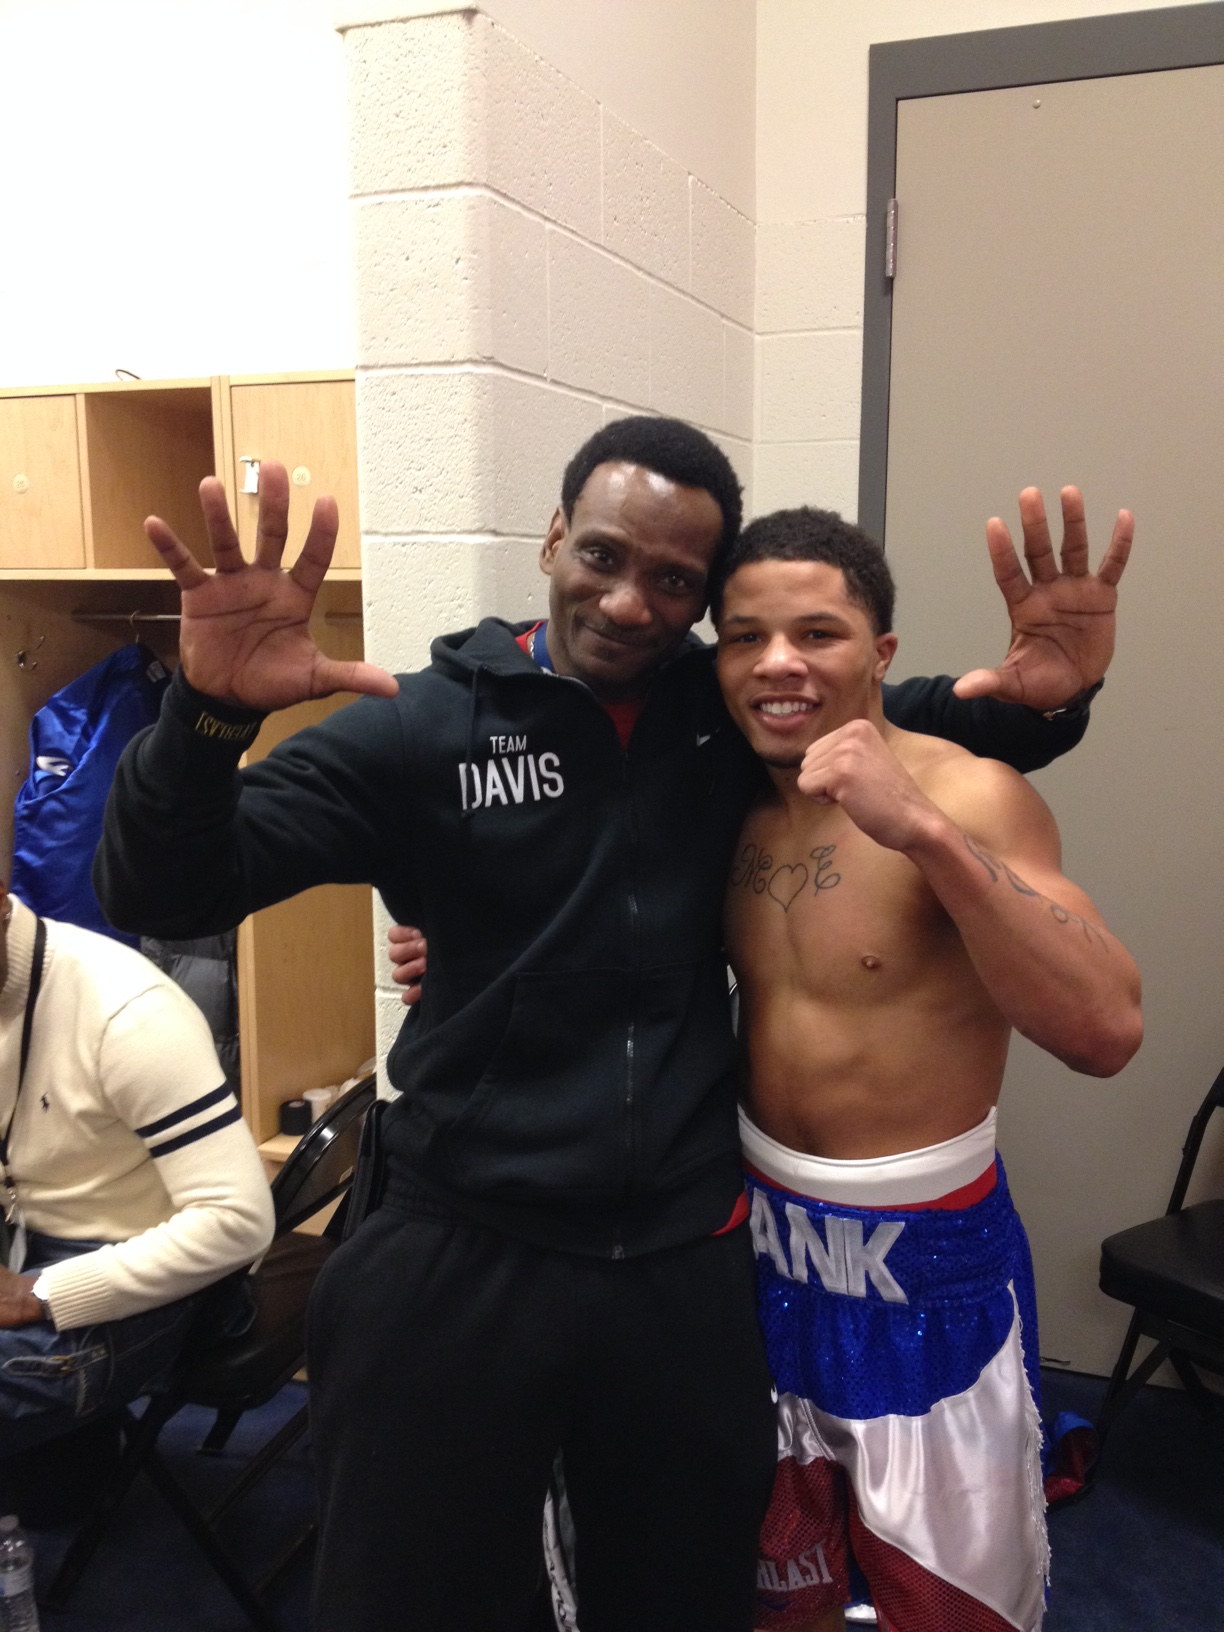 UNDEFEATED BALTIMORE BOXER GERVONTA “TANK” DAVIS WINS HIS 10th PRO FIGHT BY KO IN ...1224 x 1632